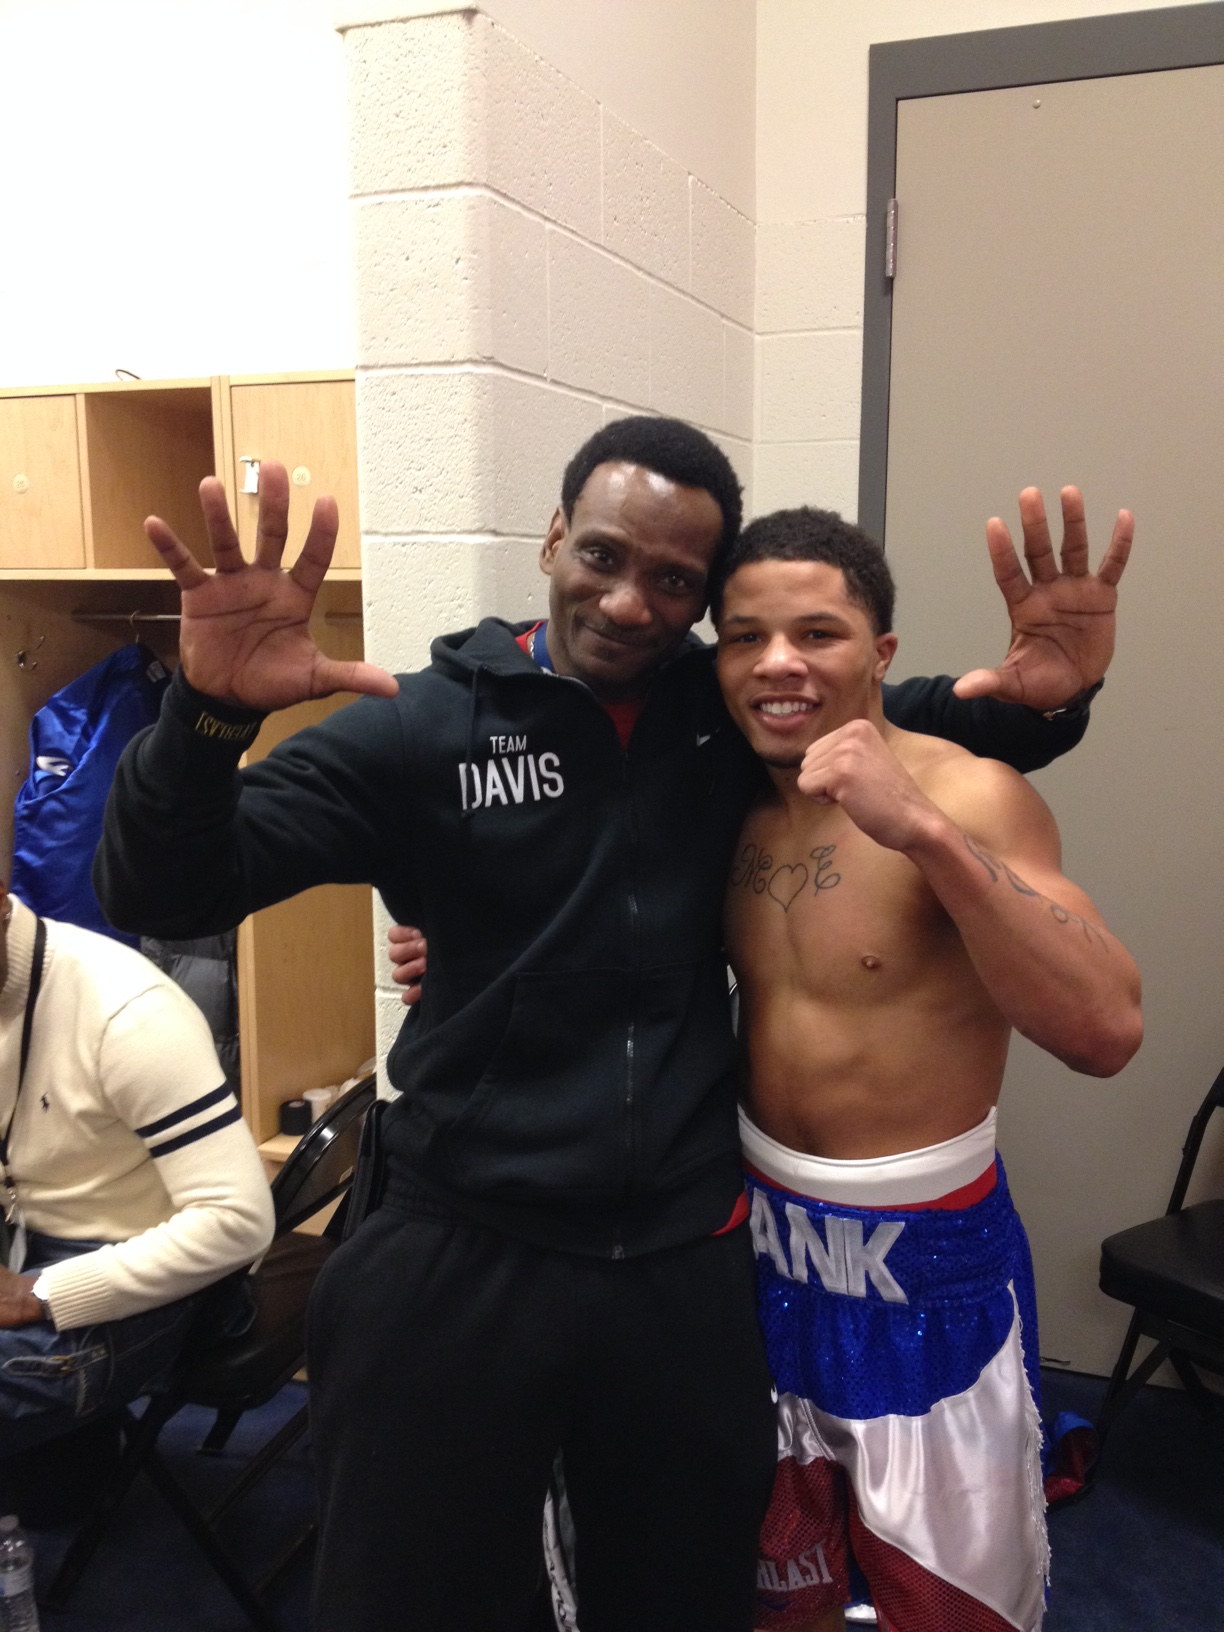 UNDEFEATED BALTIMORE BOXER GERVONTA “TANK” DAVIS WINS HIS 10th PRO FIGHT BY KO IN ...1224 x 1632